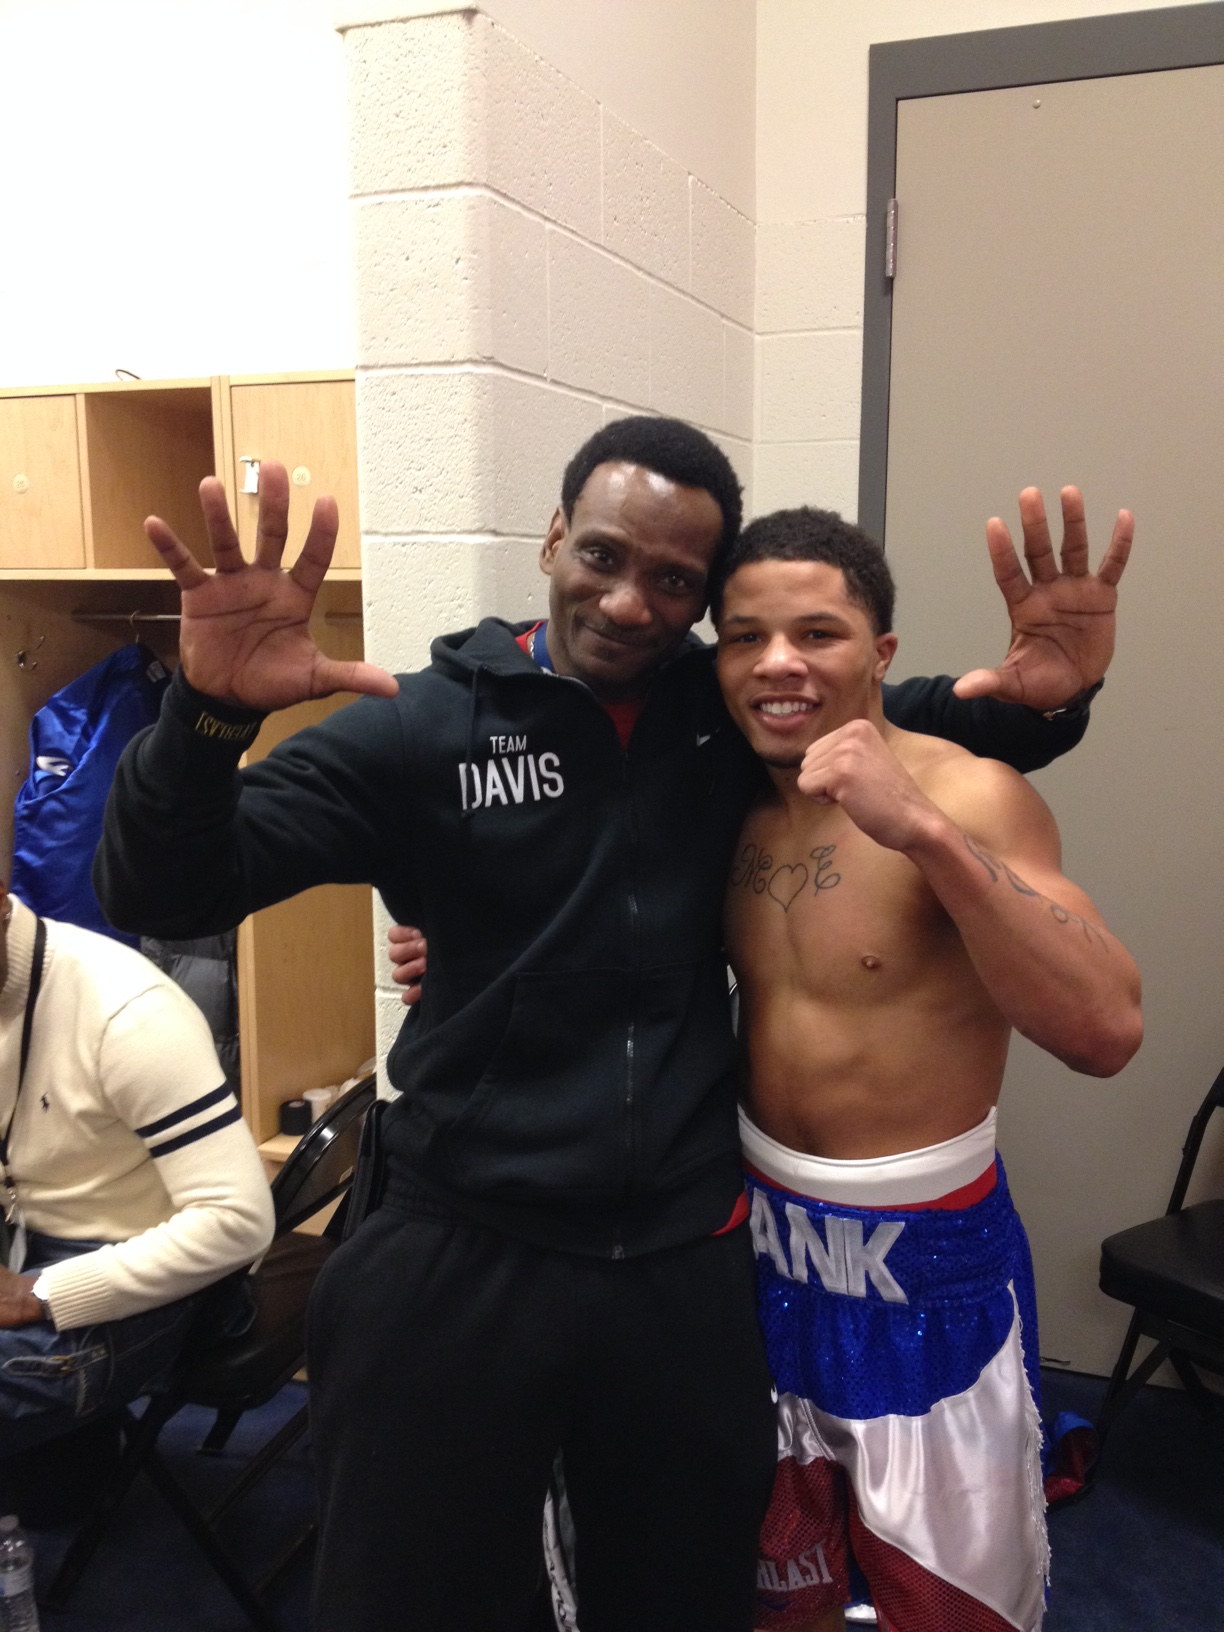 UNDEFEATED BALTIMORE BOXER GERVONTA “TANK” DAVIS WINS HIS 10th PRO FIGHT BY KO IN ...1224 x 1632